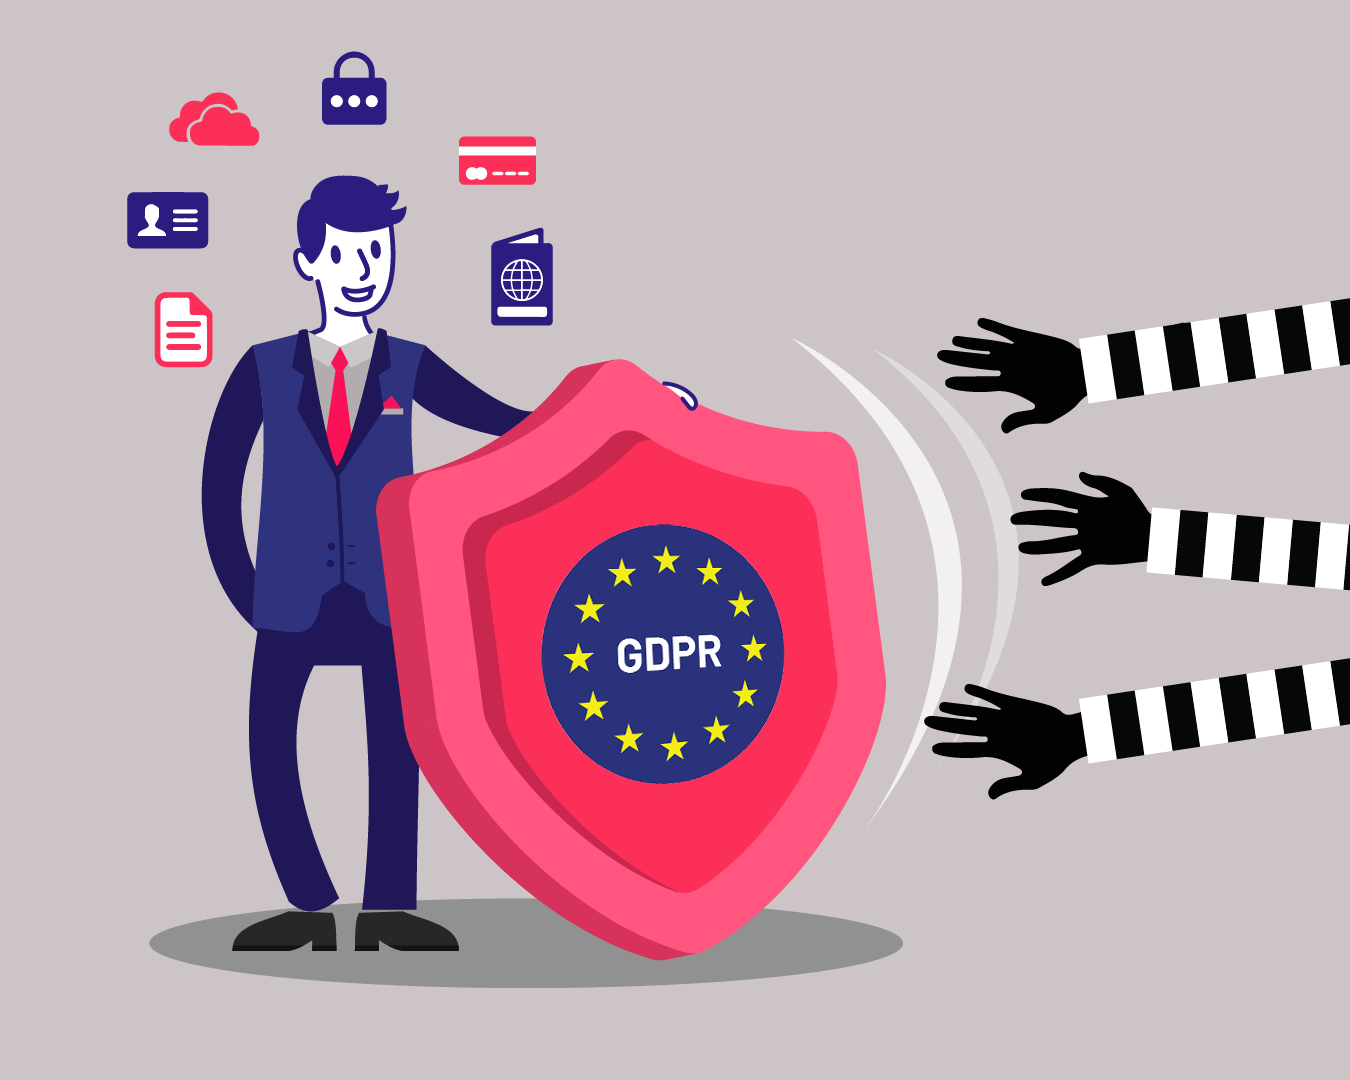 What Is GDPR And How Does It Protect Me?